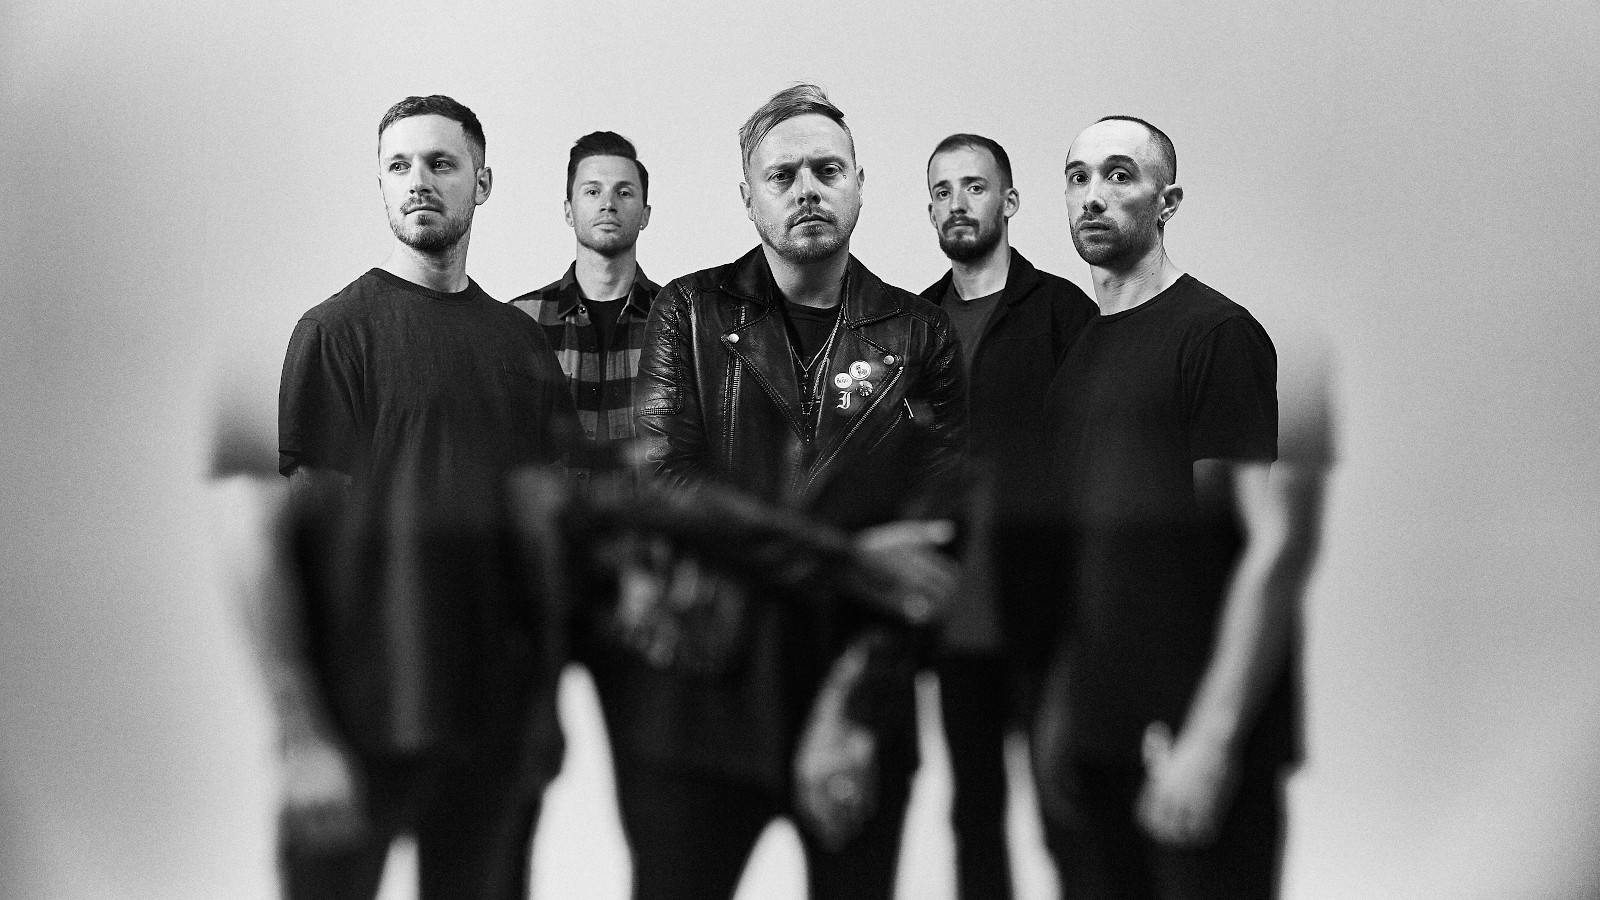 Escucha ‘For Those That Wish To Exist’ de Architects